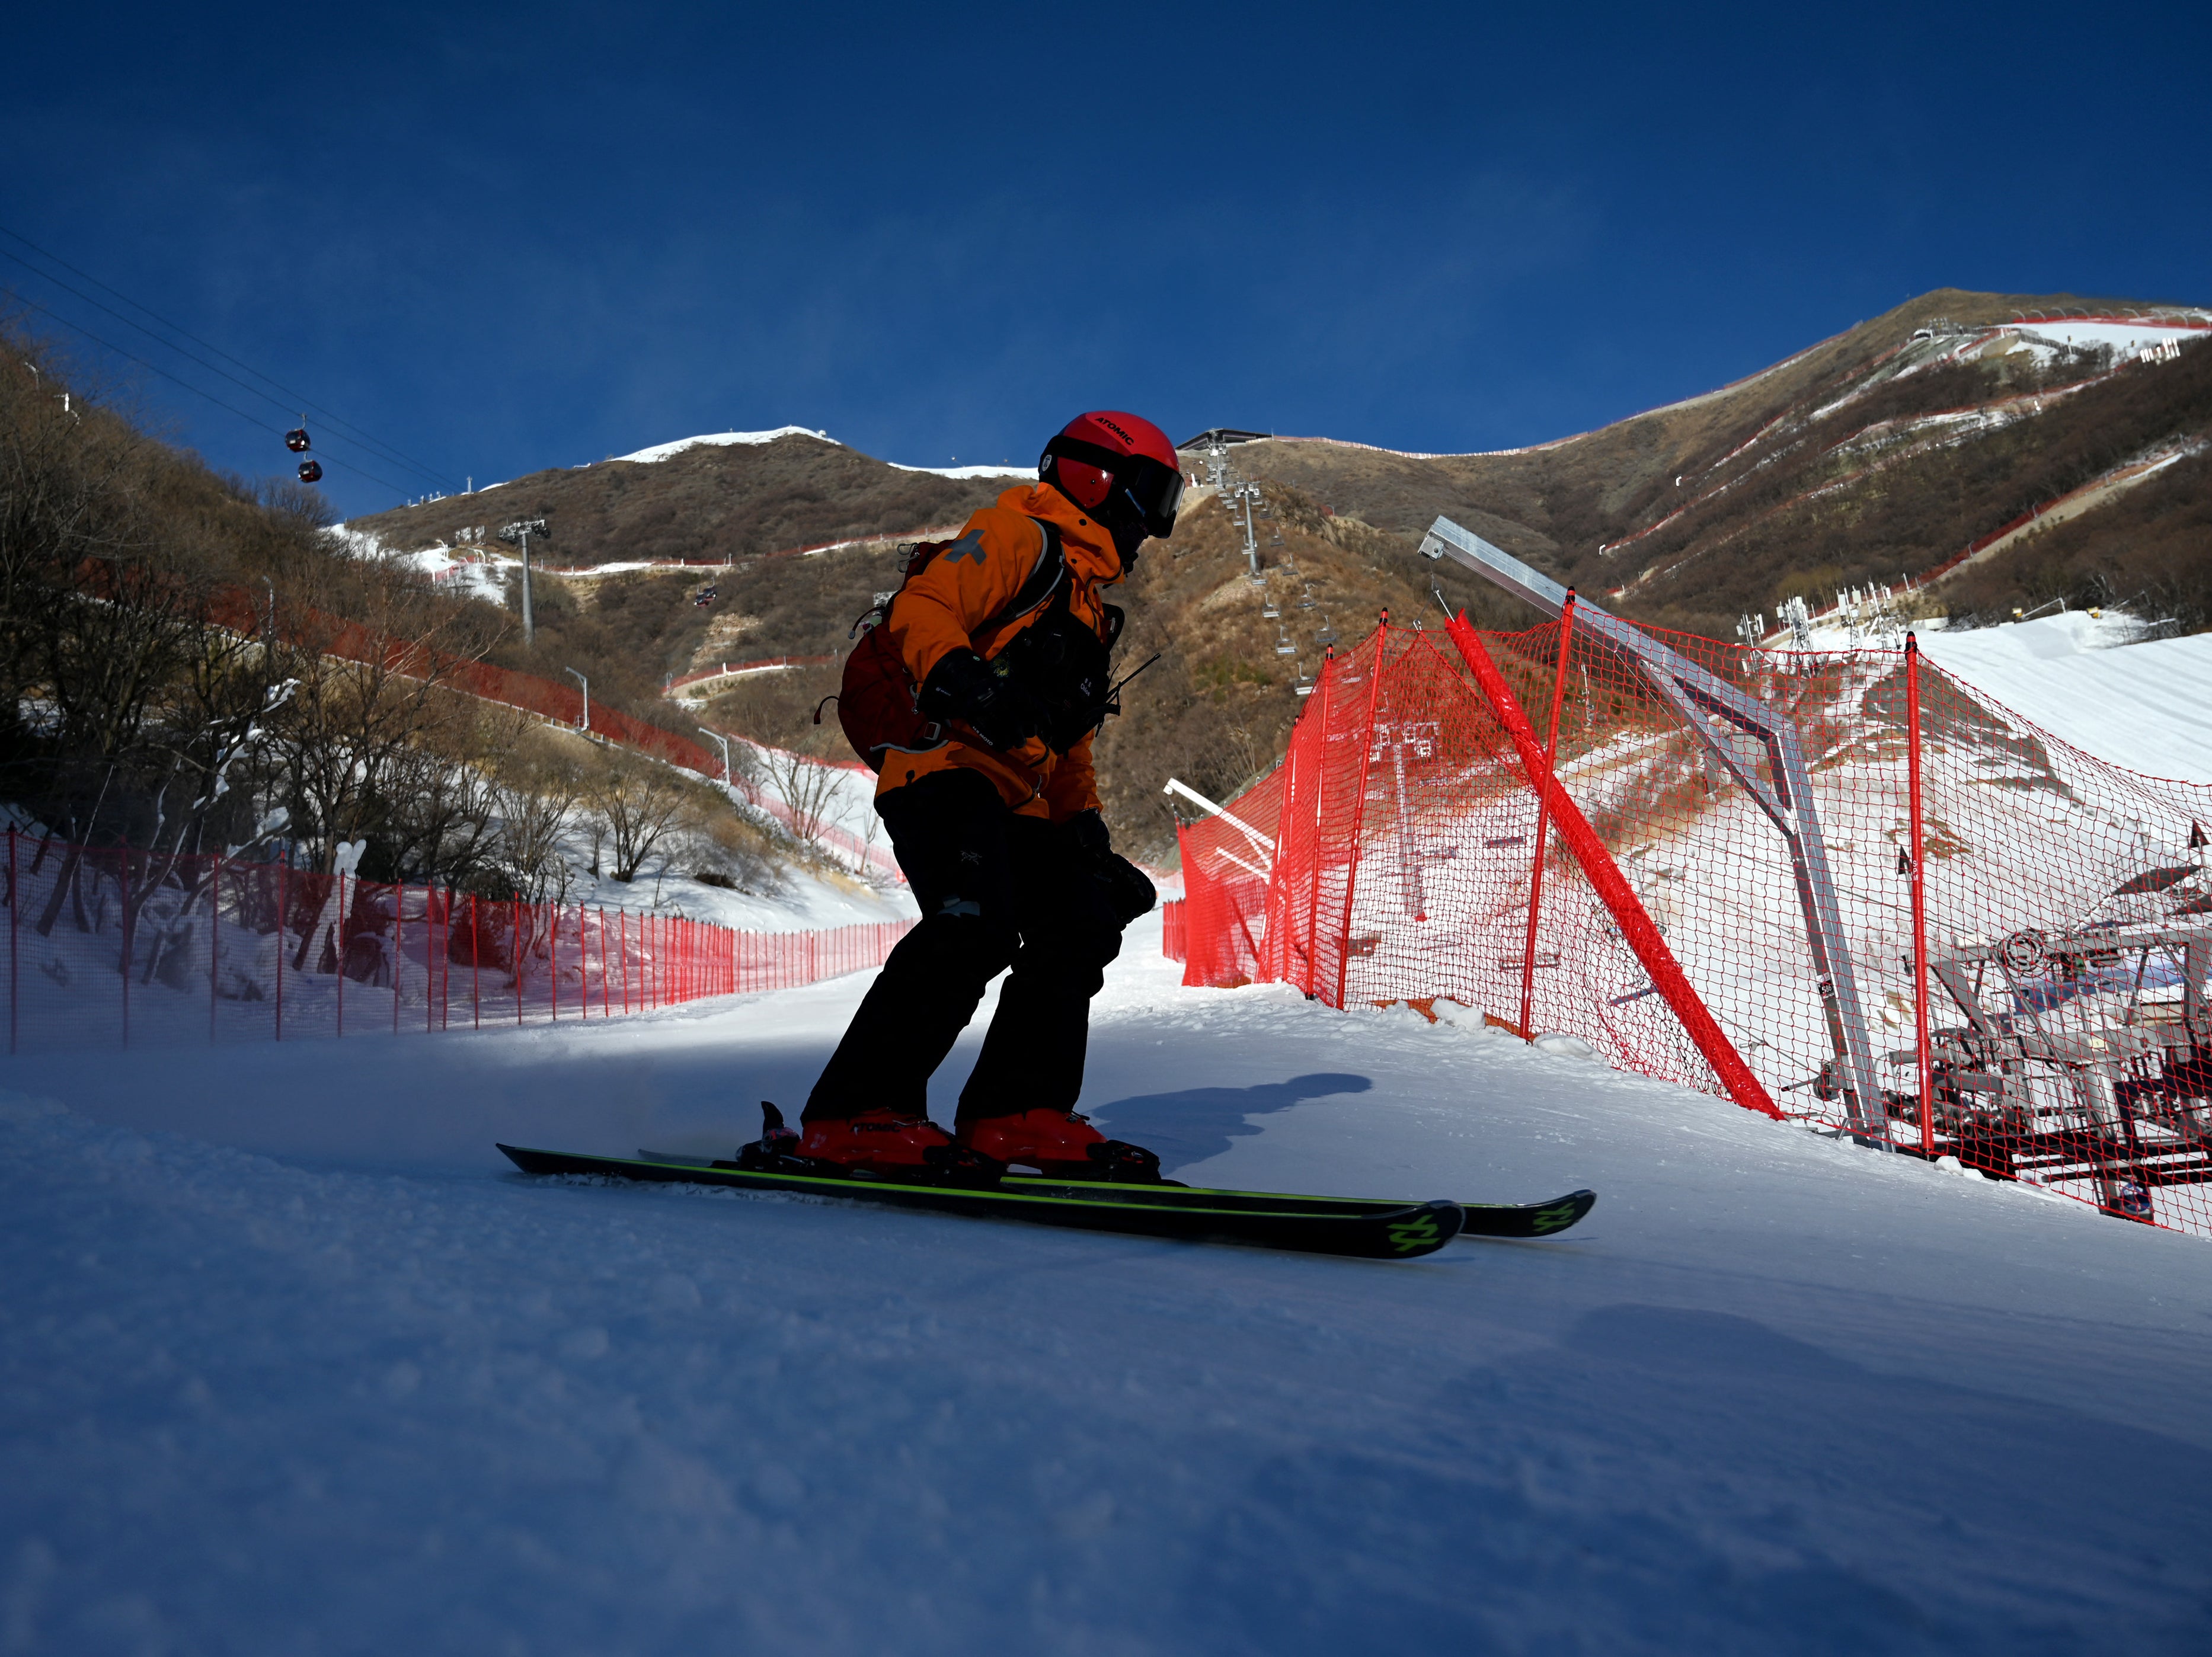 The National Alpine Ski Centre has been built in the Yanqing area, where thousands of trees have been moved for the games